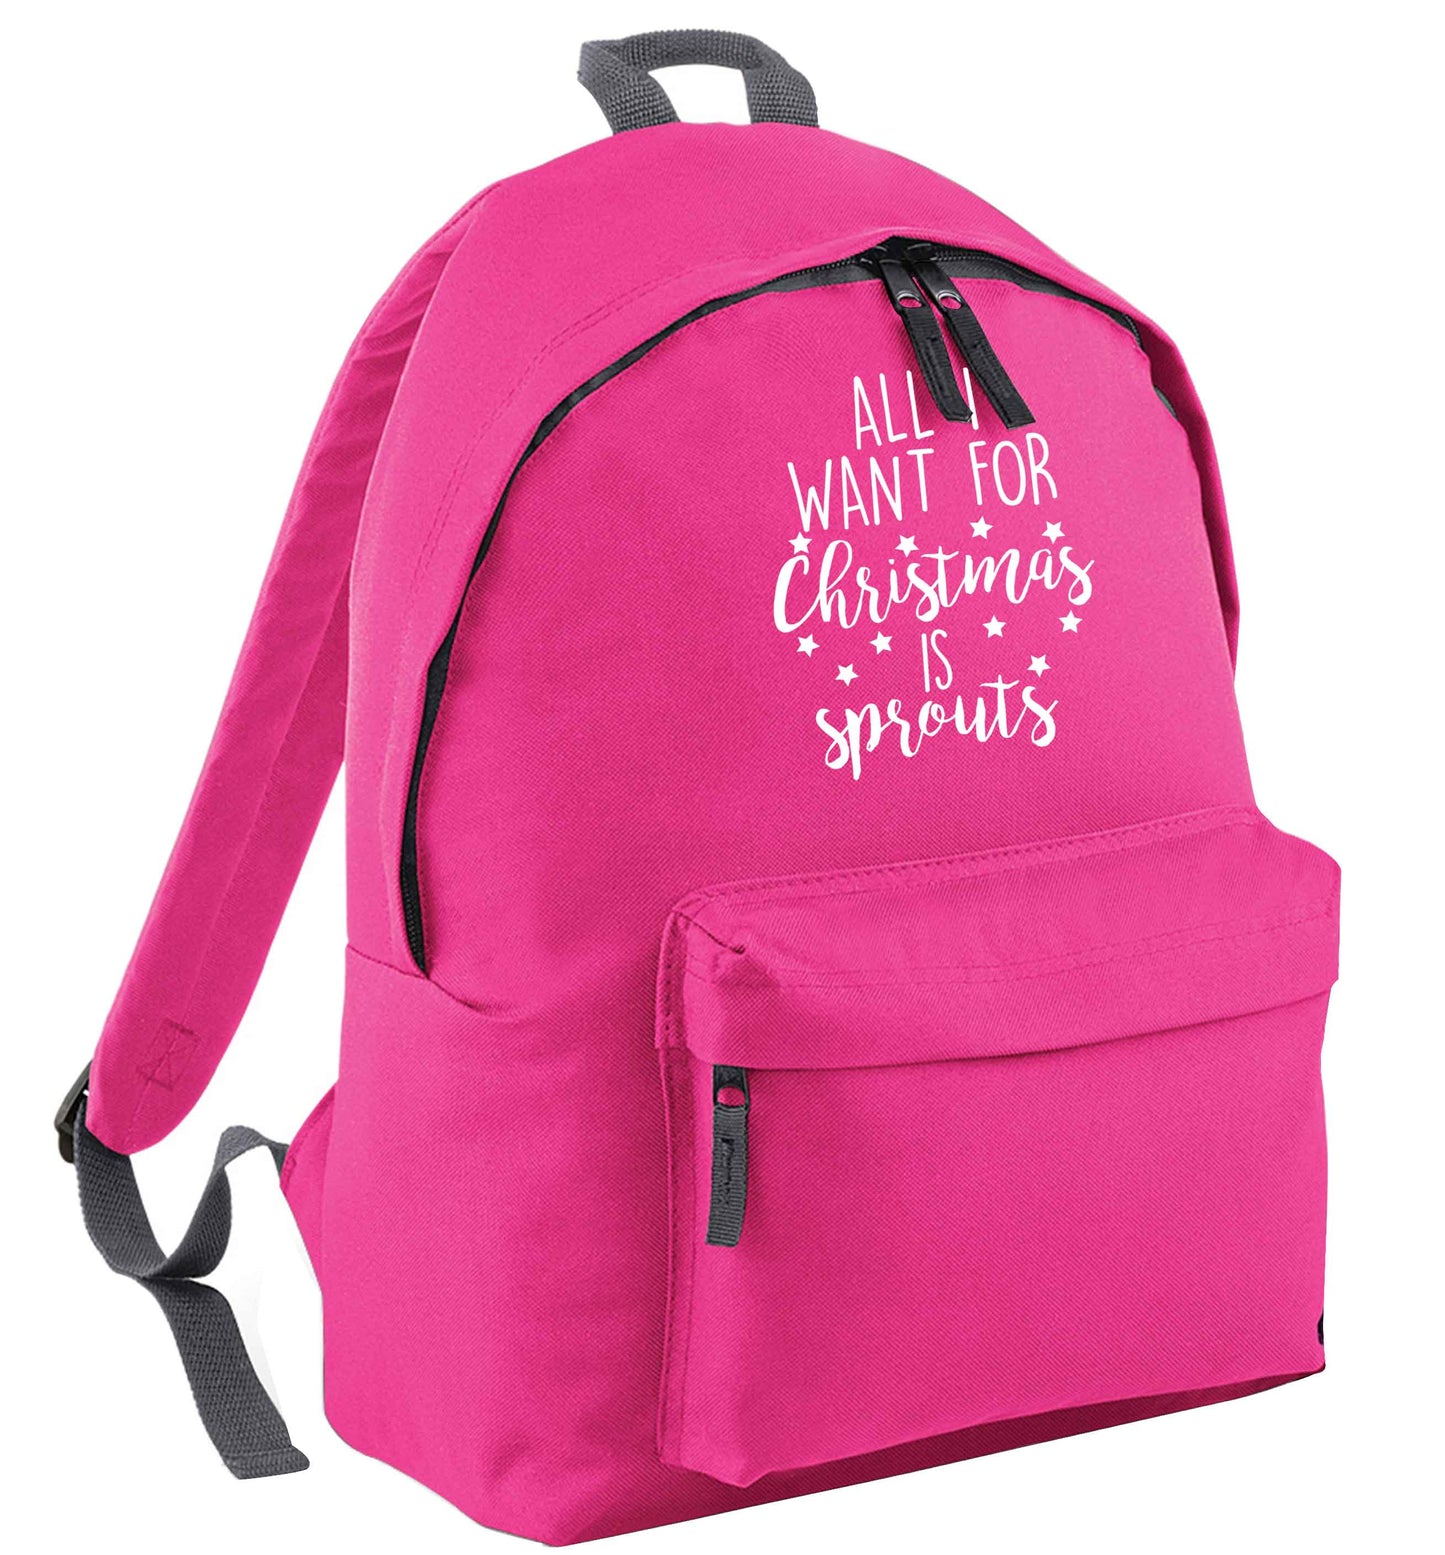 All I want for Christmas is sprouts | Children's backpack